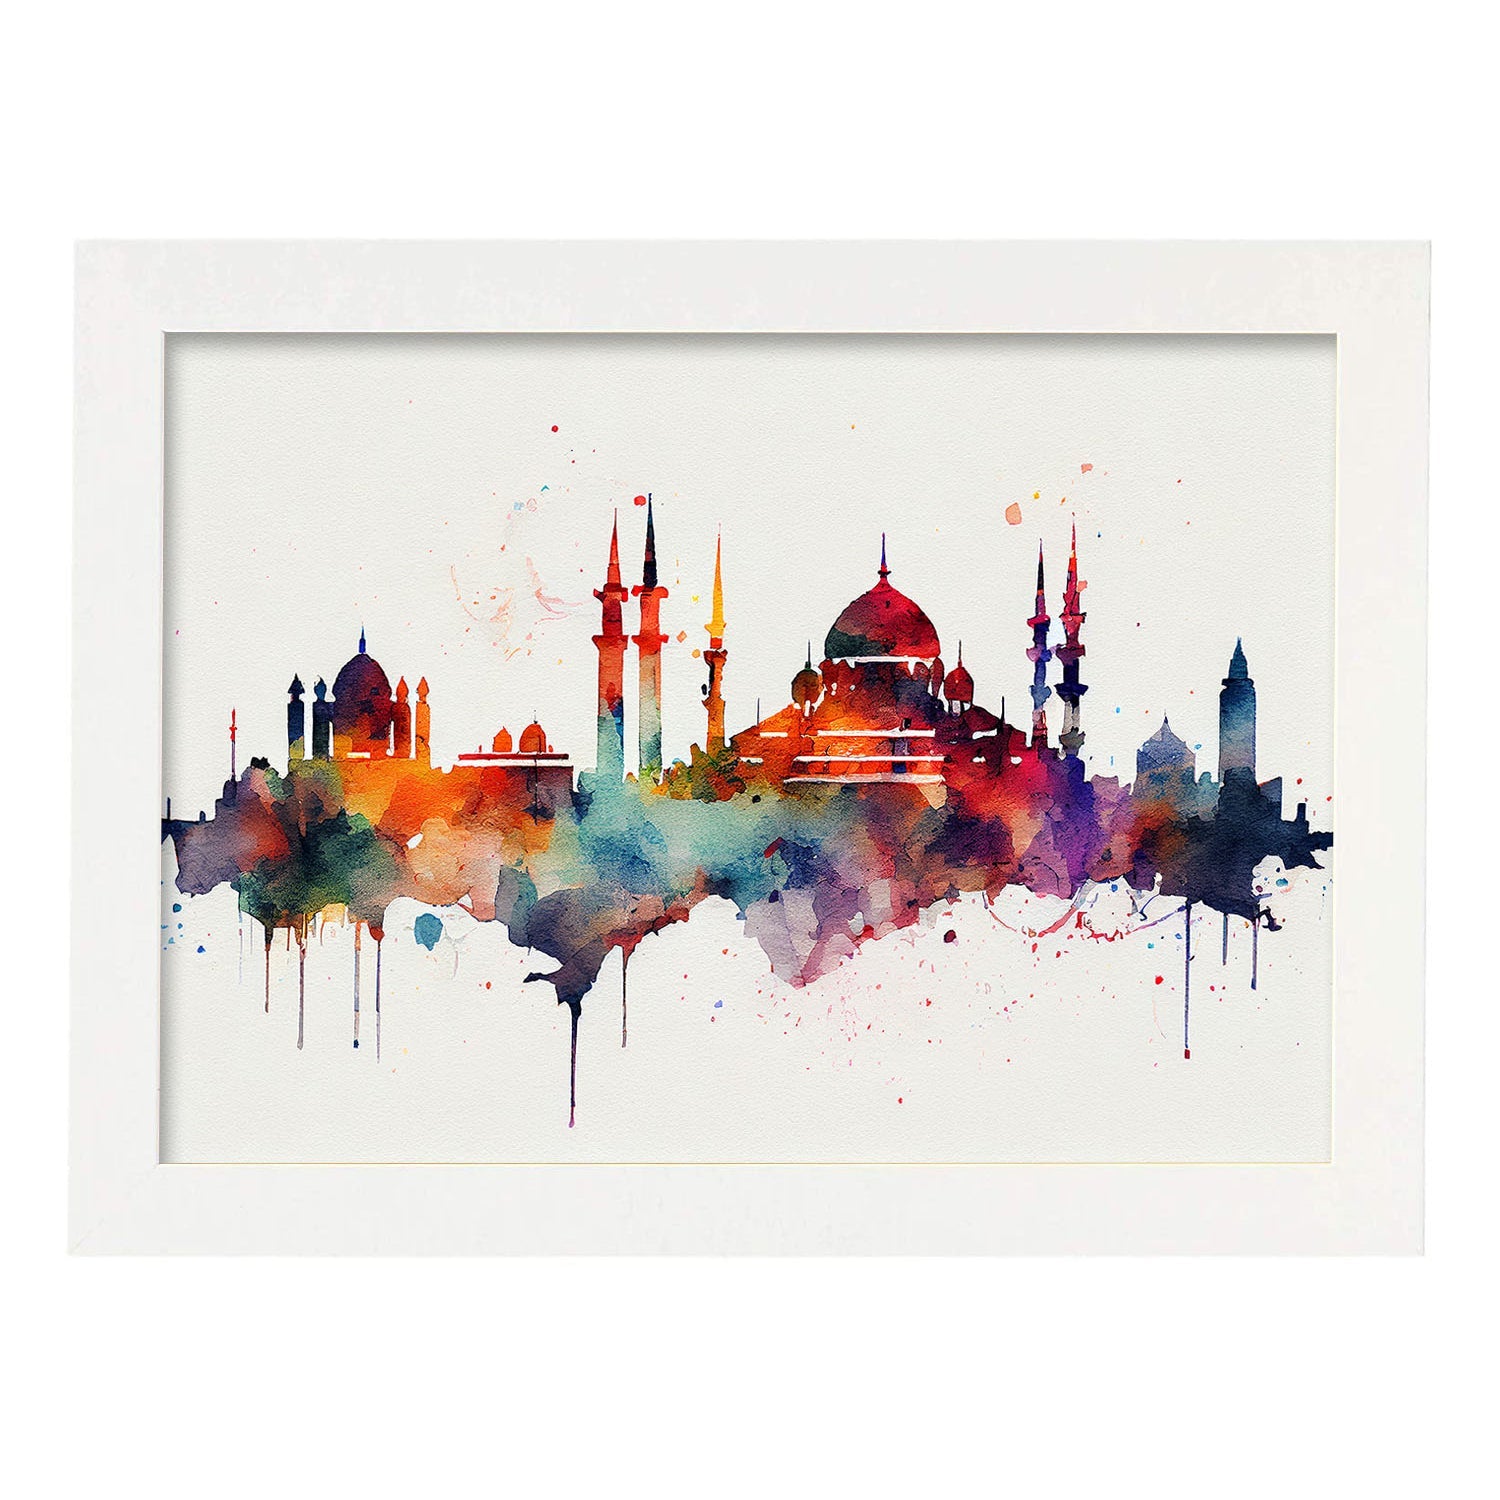 Nacnic watercolor of a skyline of the city of Istanbul_4. Aesthetic Wall Art Prints for Bedroom or Living Room Design.-Artwork-Nacnic-A4-Marco Blanco-Nacnic Estudio SL